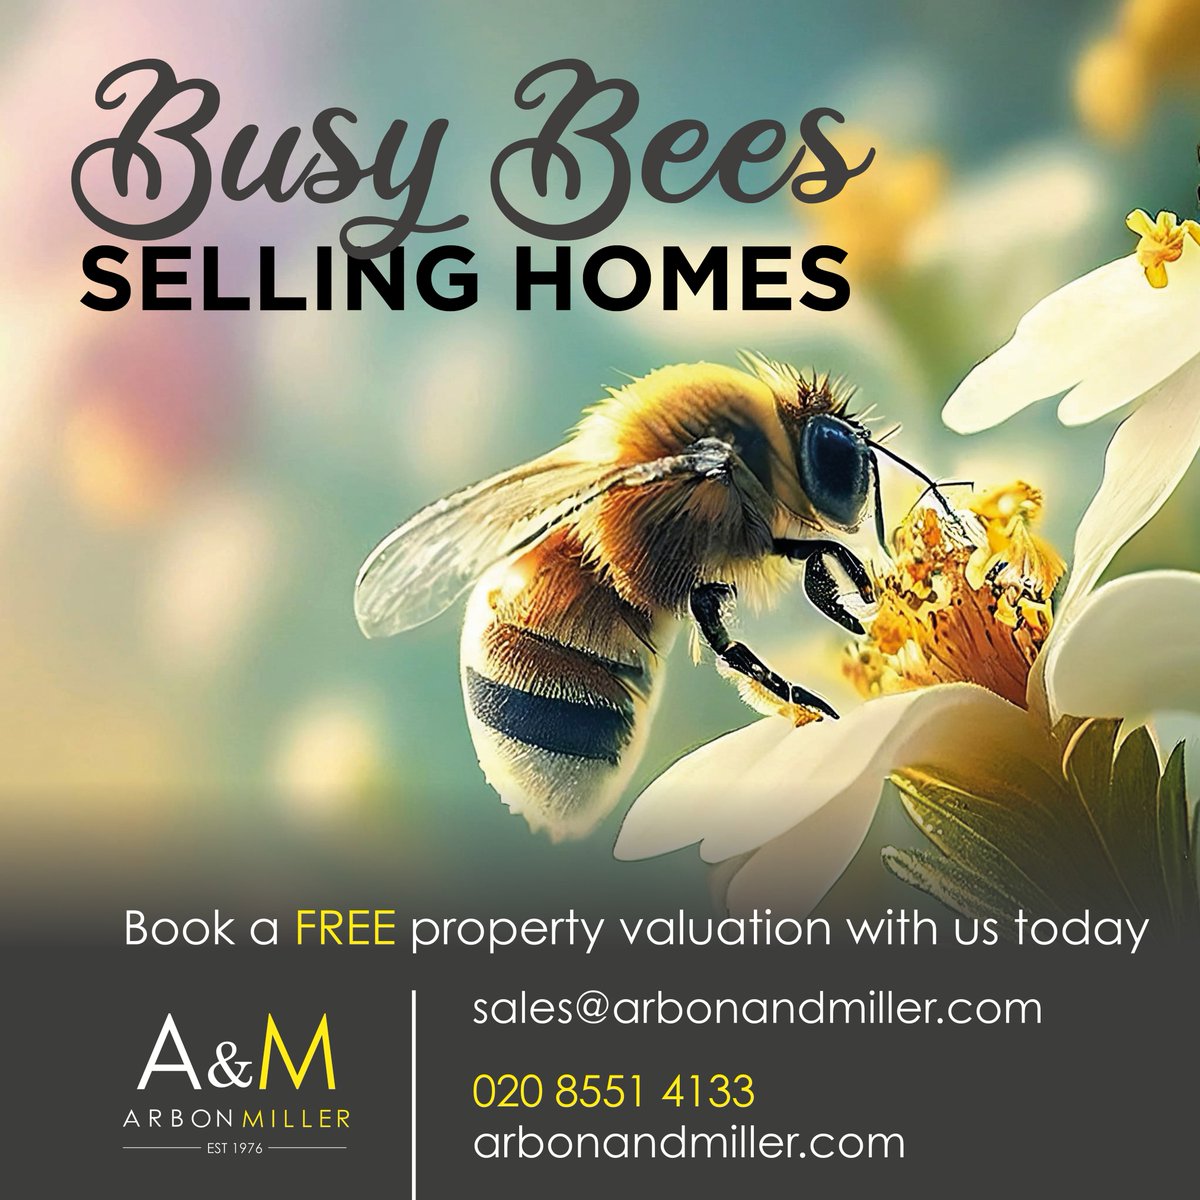 #busybees #movinghome #arbonandmiller